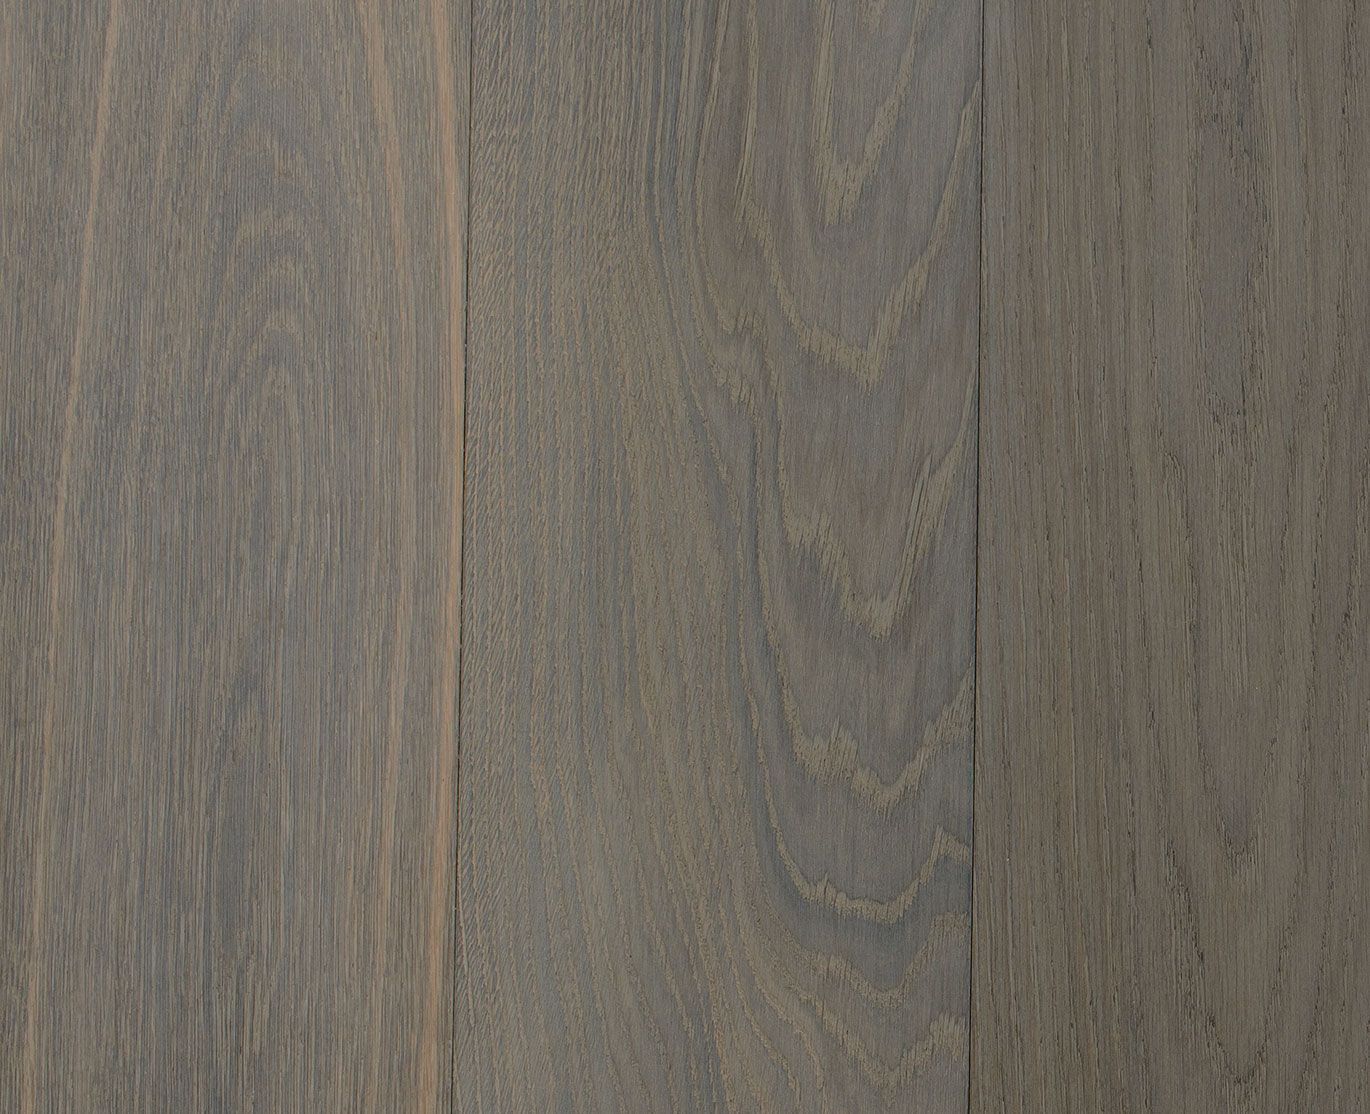 12 Trendy Hardwood Flooring Tips and Tricks 2024 free download hardwood flooring tips and tricks of dark and moody carrying all shades of grey with hints flooring with dark and moody carrying all shades of grey with hints